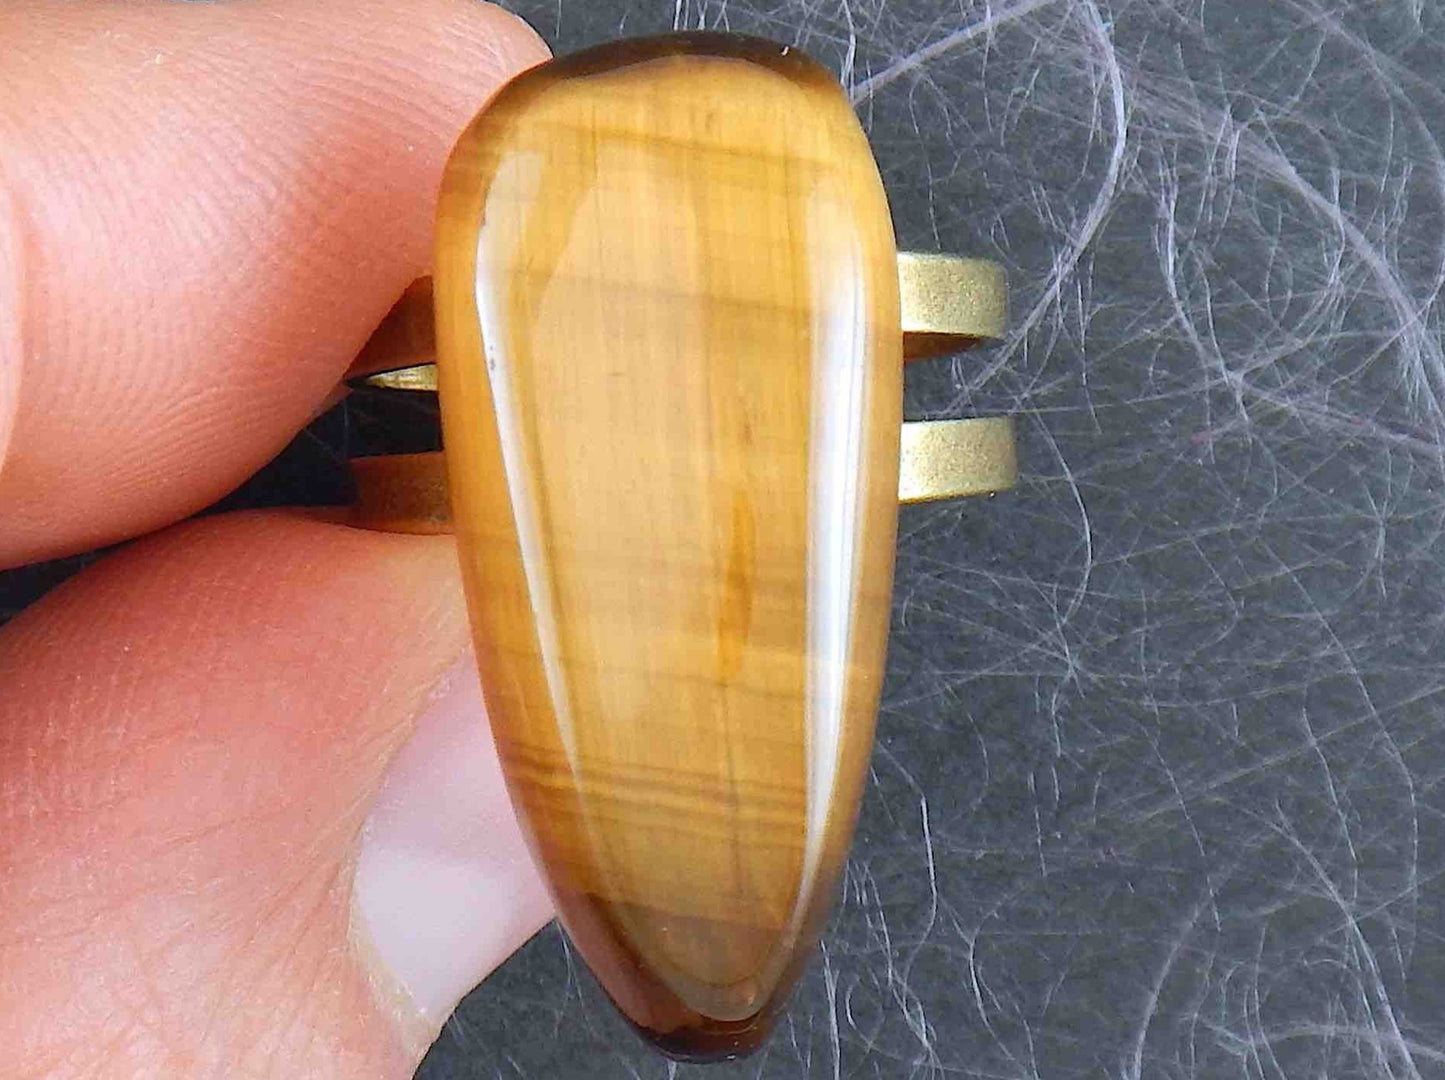 Finger ring with long drop-shaped golden tiger eye stone cabochon, adjustable brass base (US 5-6)